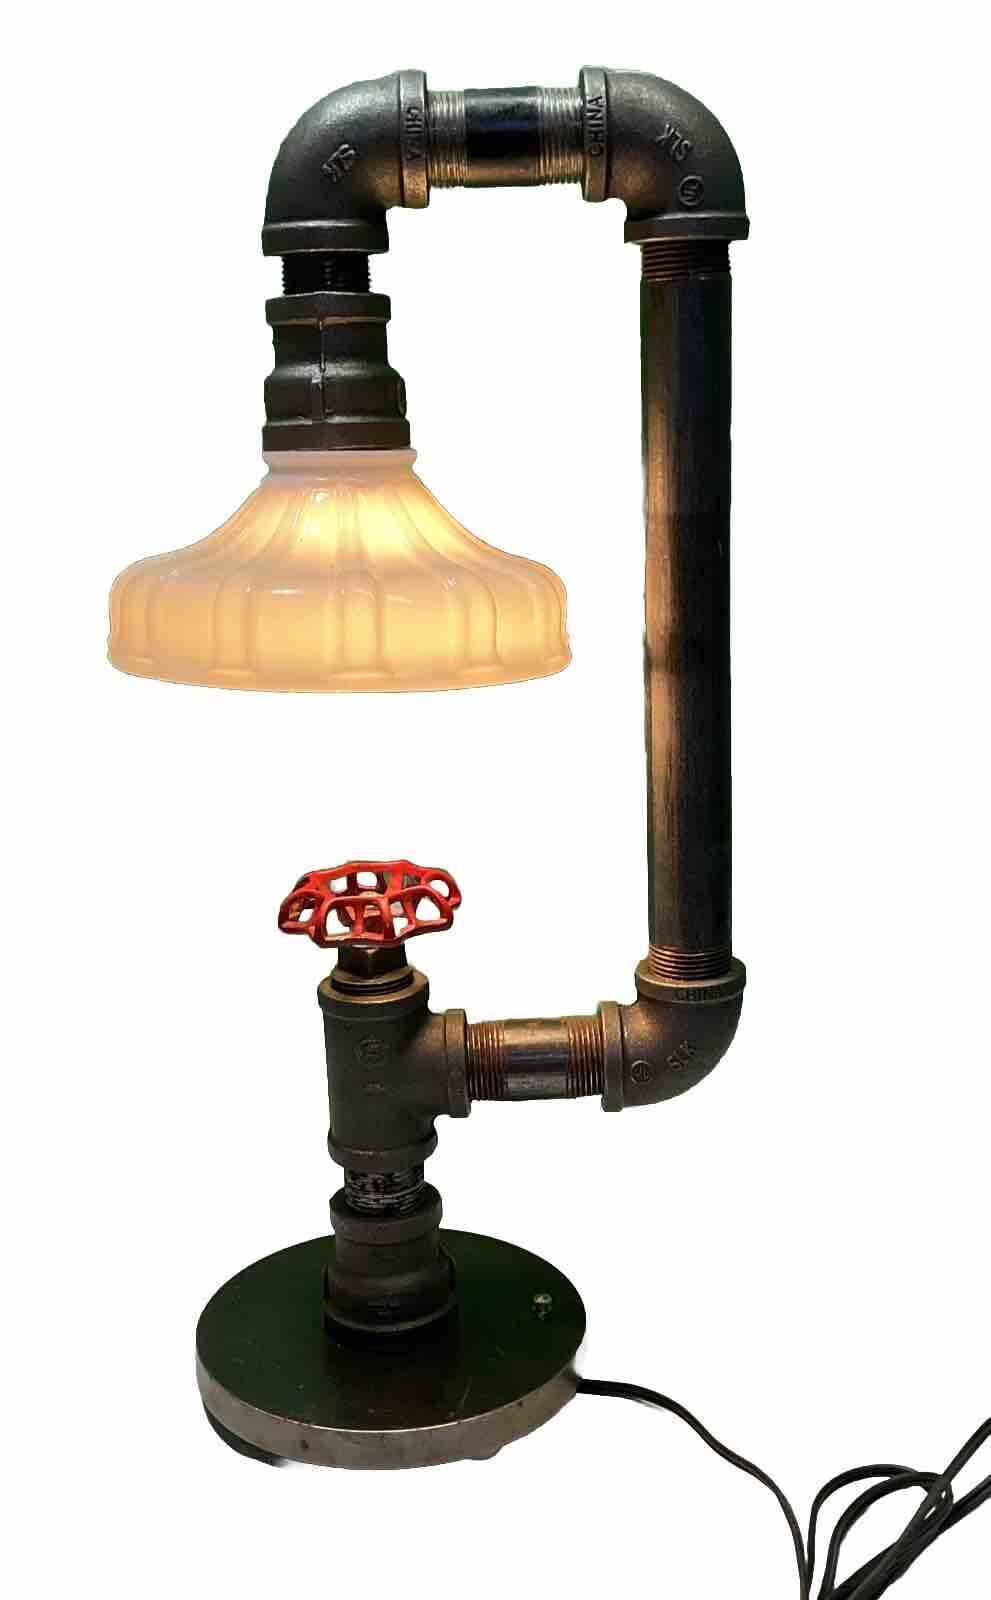 VTG Handcrafted Retro Industrial Pipe desk lamp with valve on/off switch-20.5”T